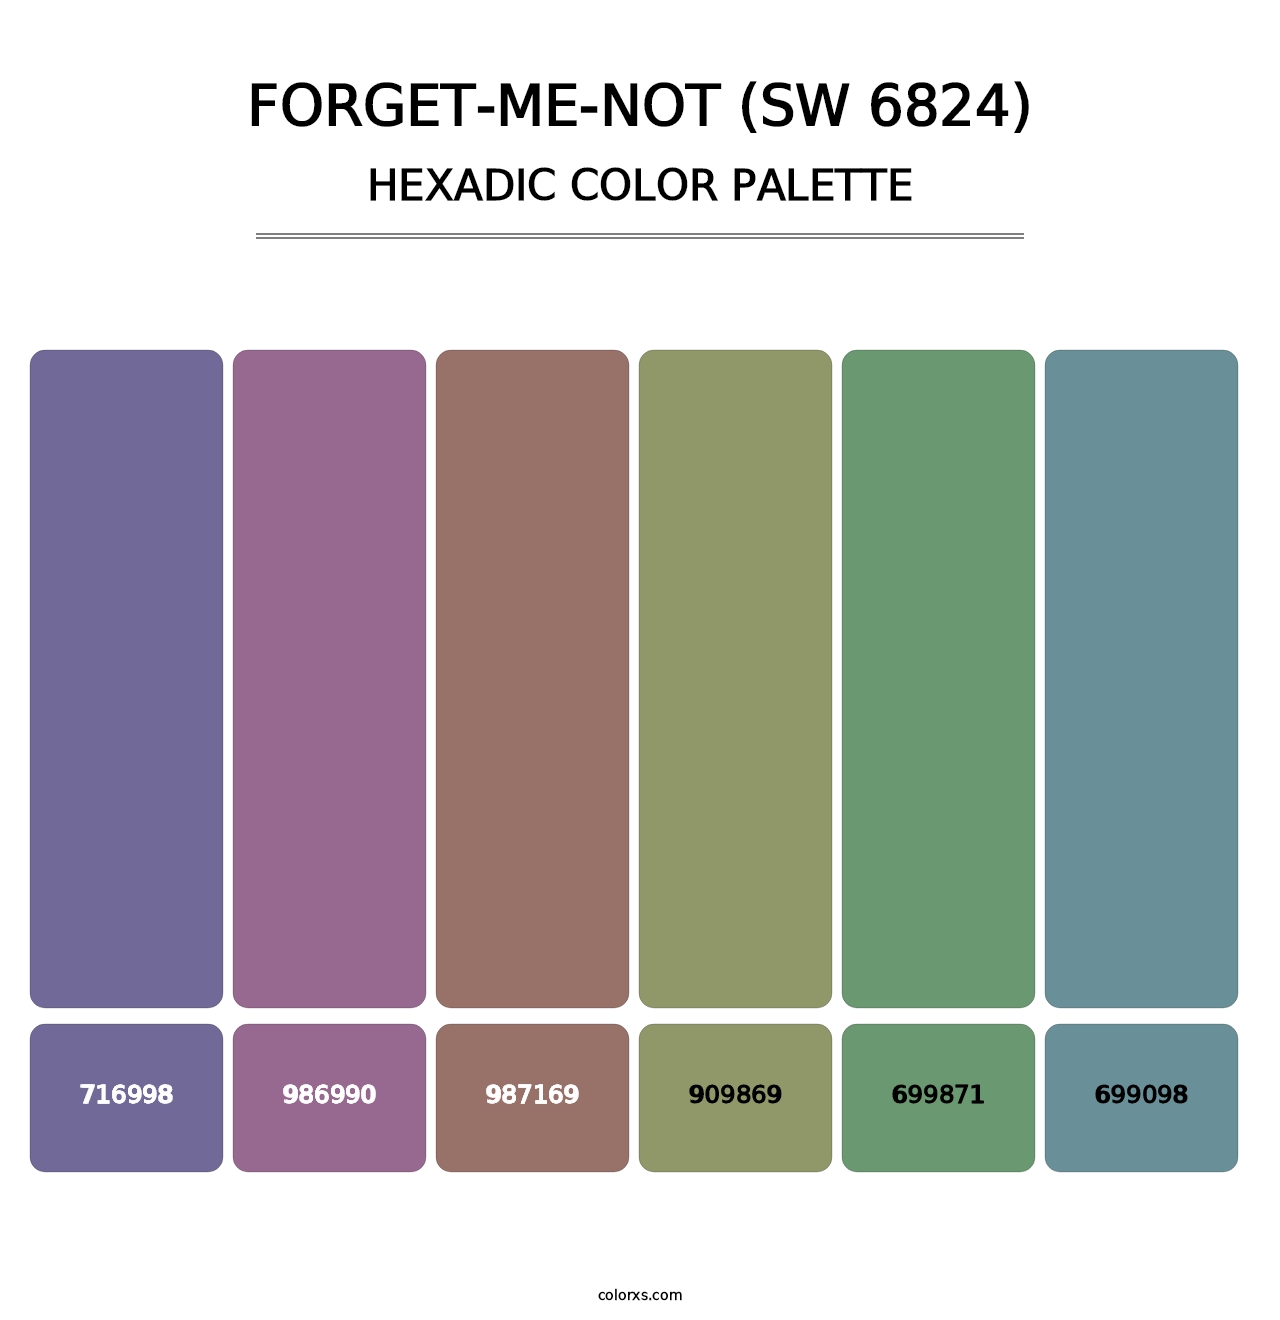 Forget-Me-Not (SW 6824) - Hexadic Color Palette